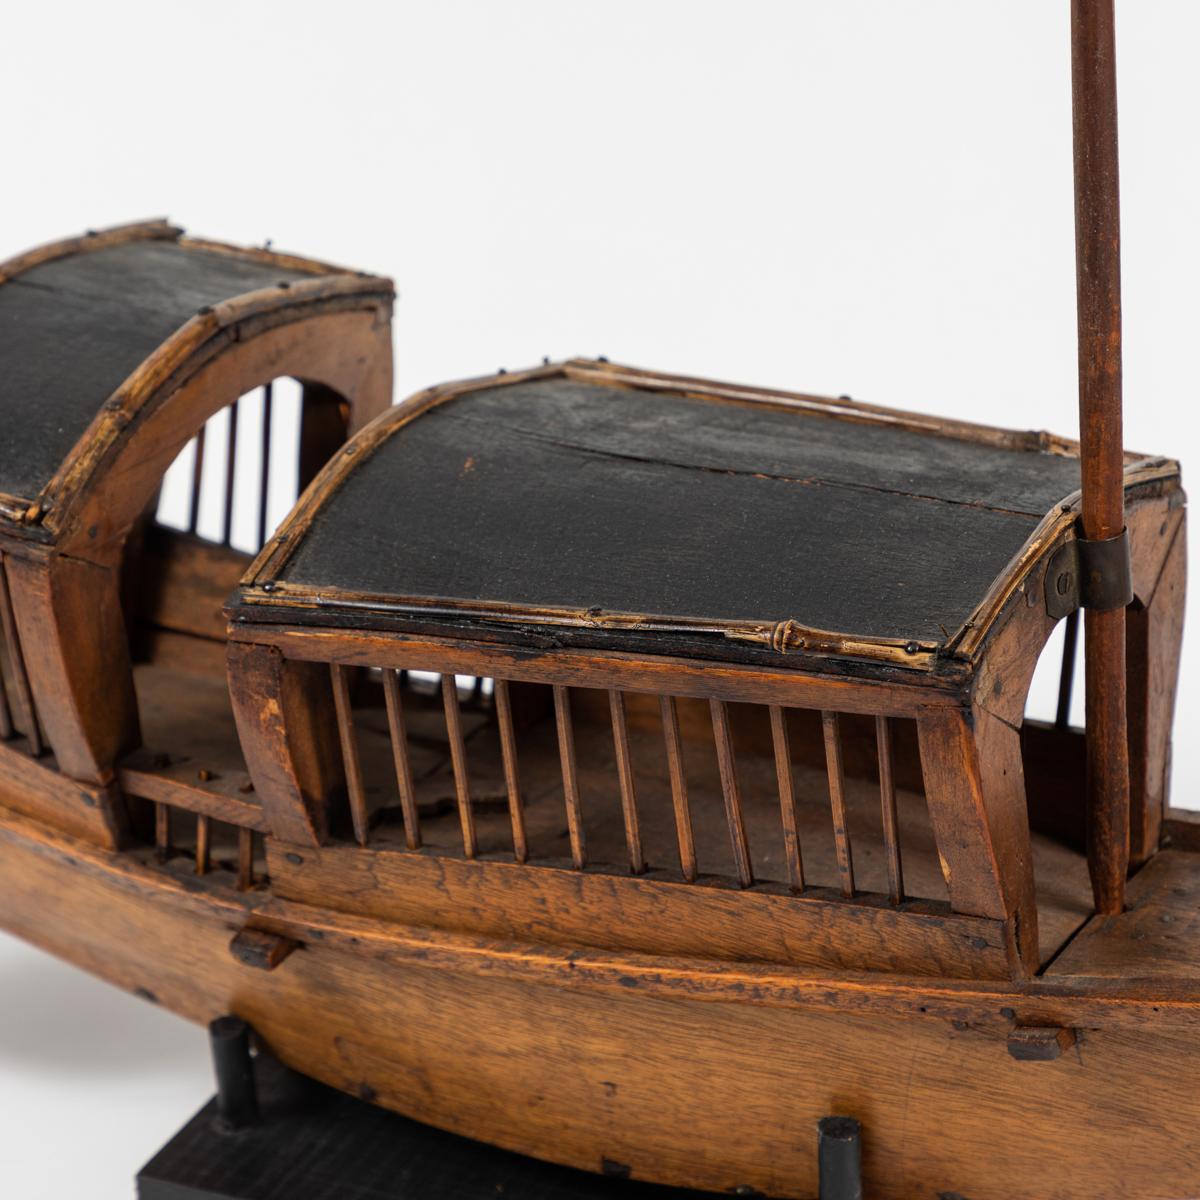 Hand-Carved Rustic Belgian Wooden Boat